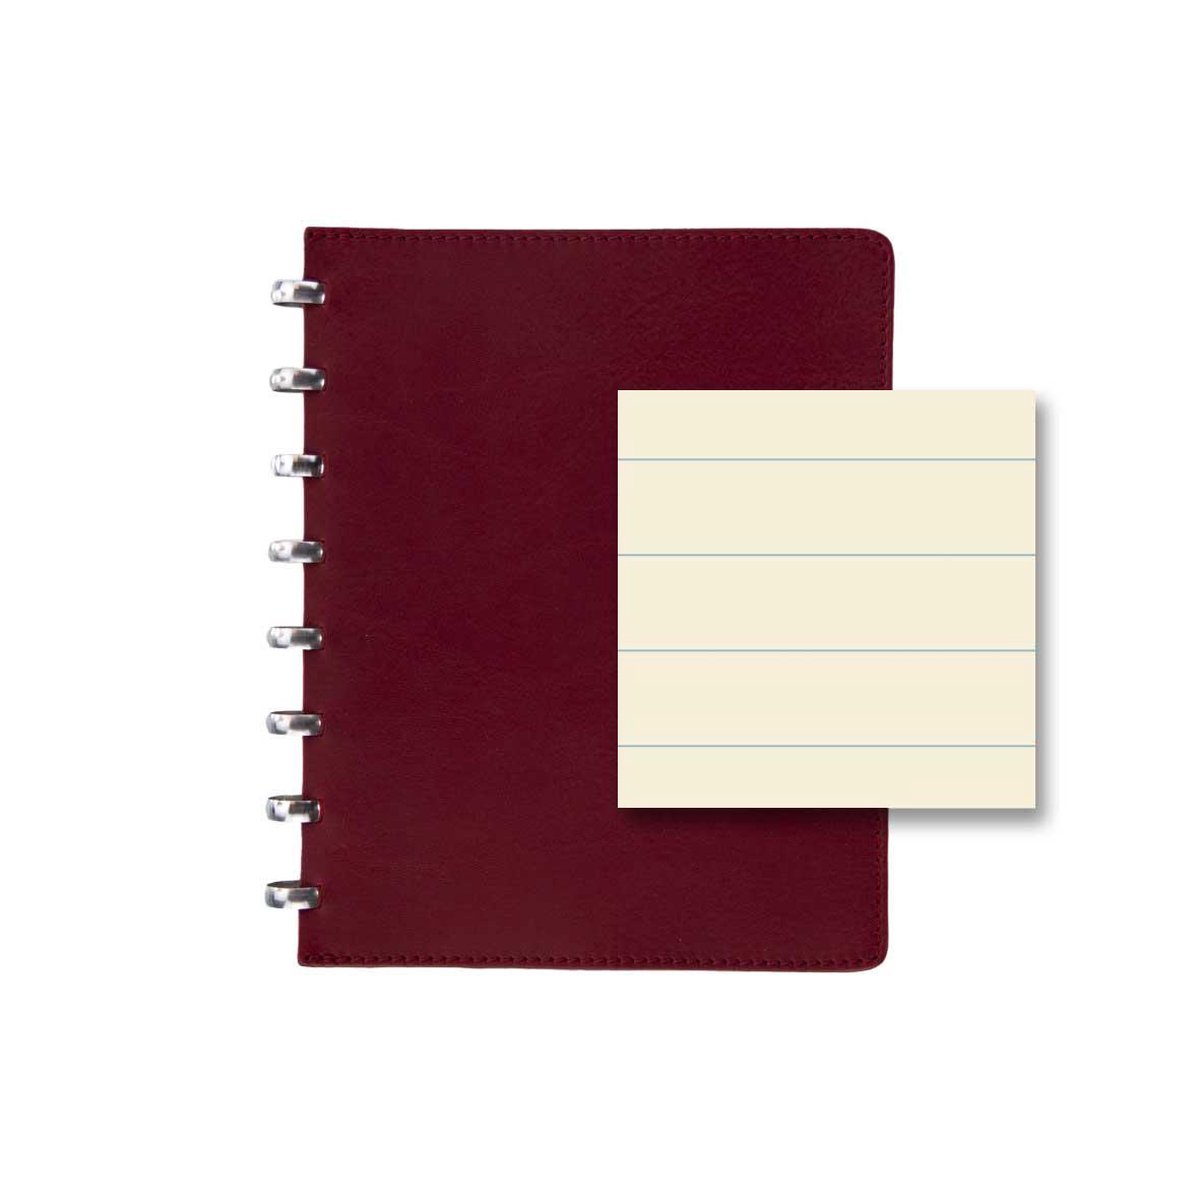 Atoma | Notebook Systeem | Pur | Copy book | A5 | rood | Gelinieerd